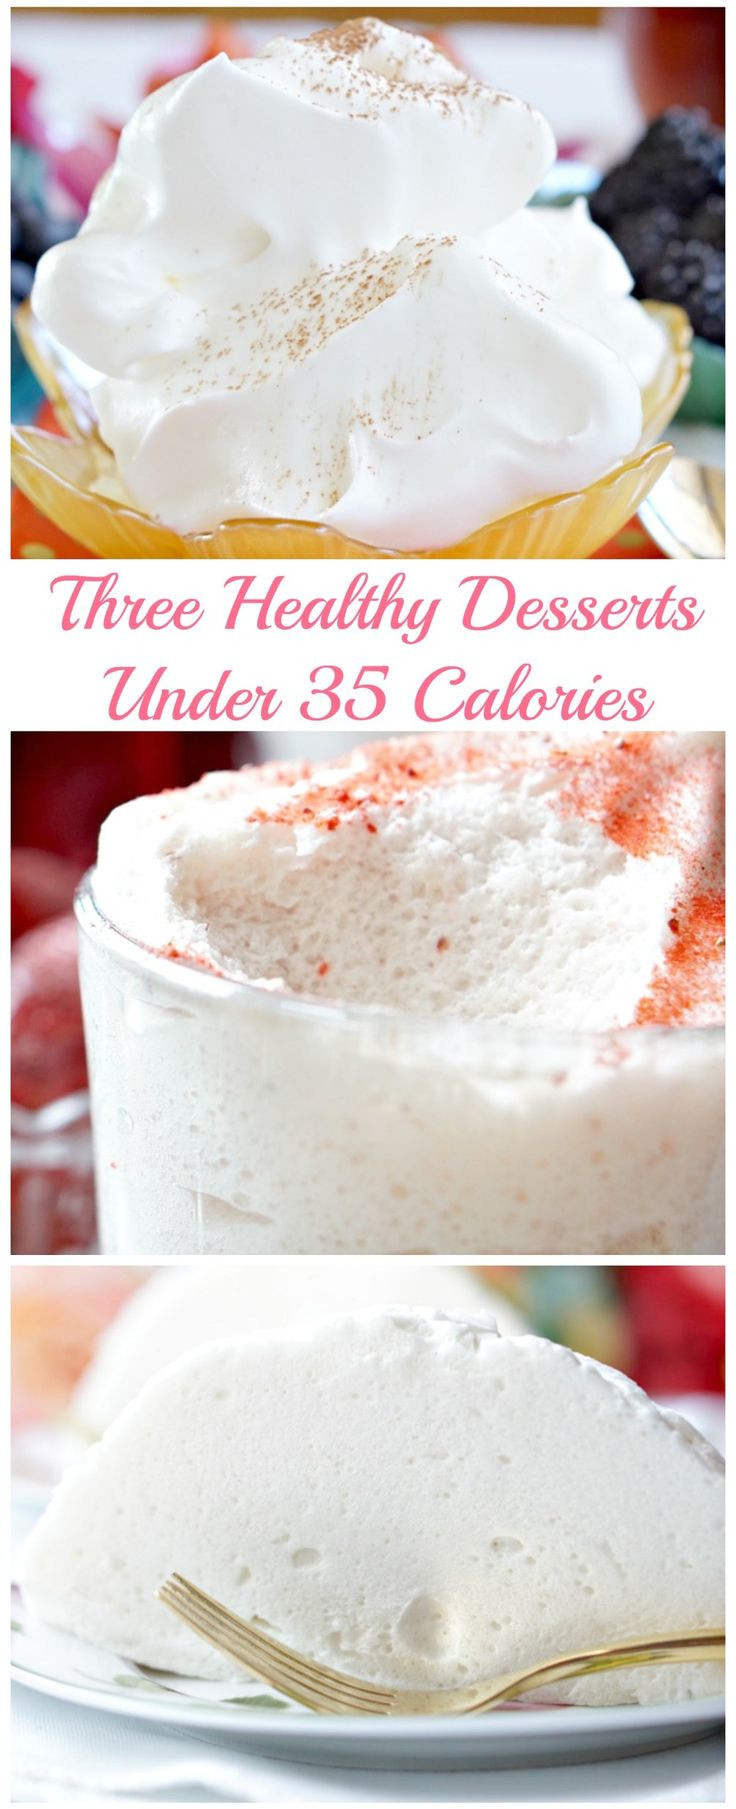 Low Calorie Christmas Desserts
 Avoid Holiday Weight Gain